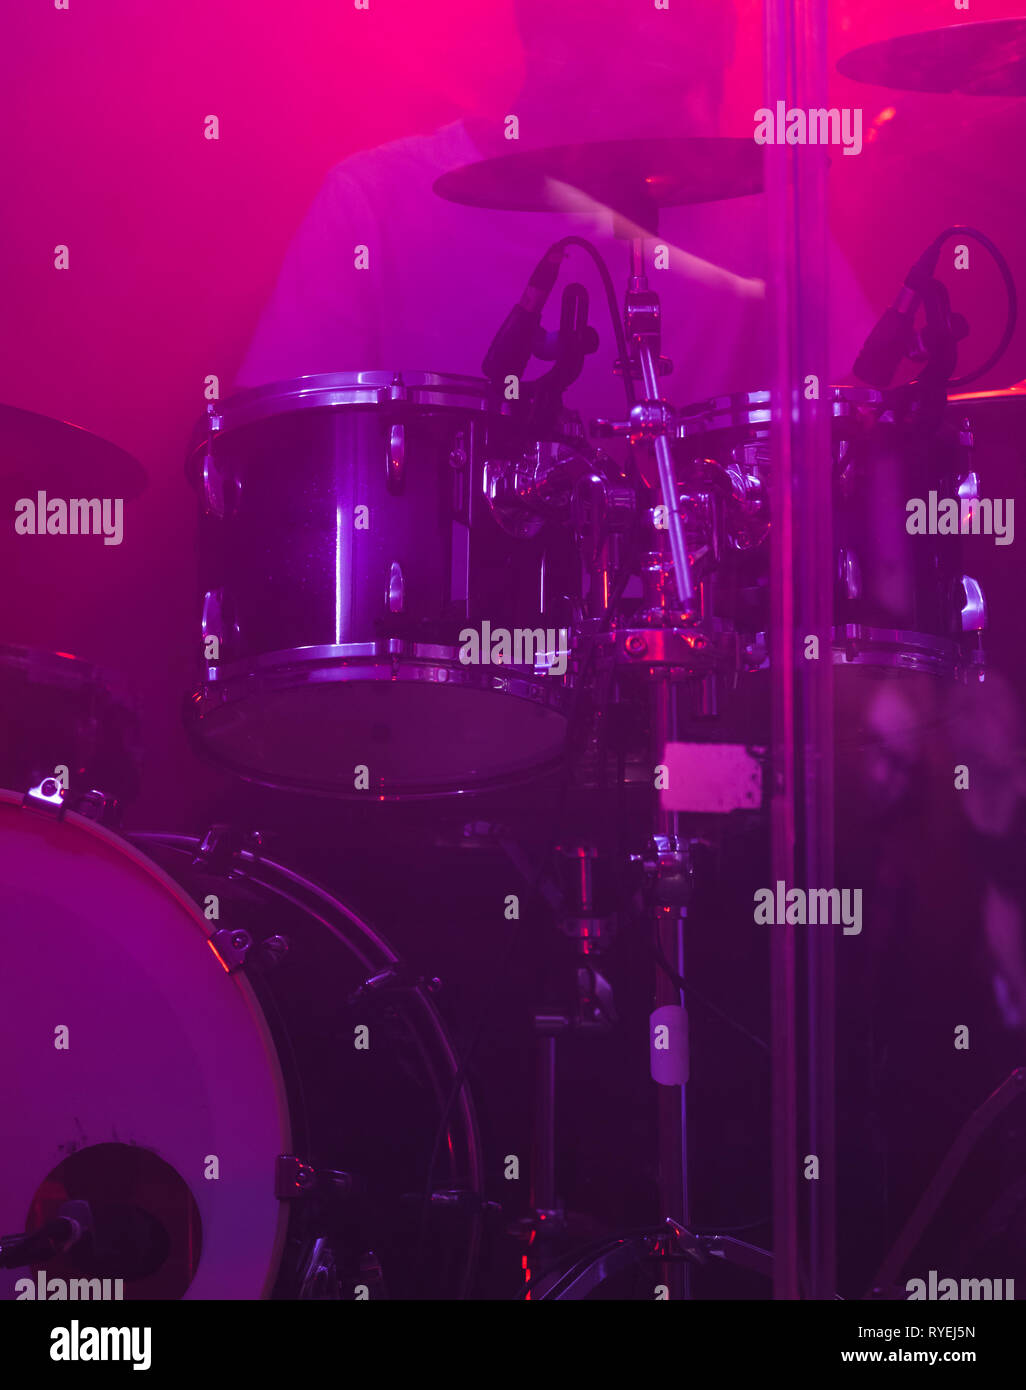 Live music vertical photo background, rock drum set with cymbals in purple stage light. Closeup photo, soft selective focus Stock Photo